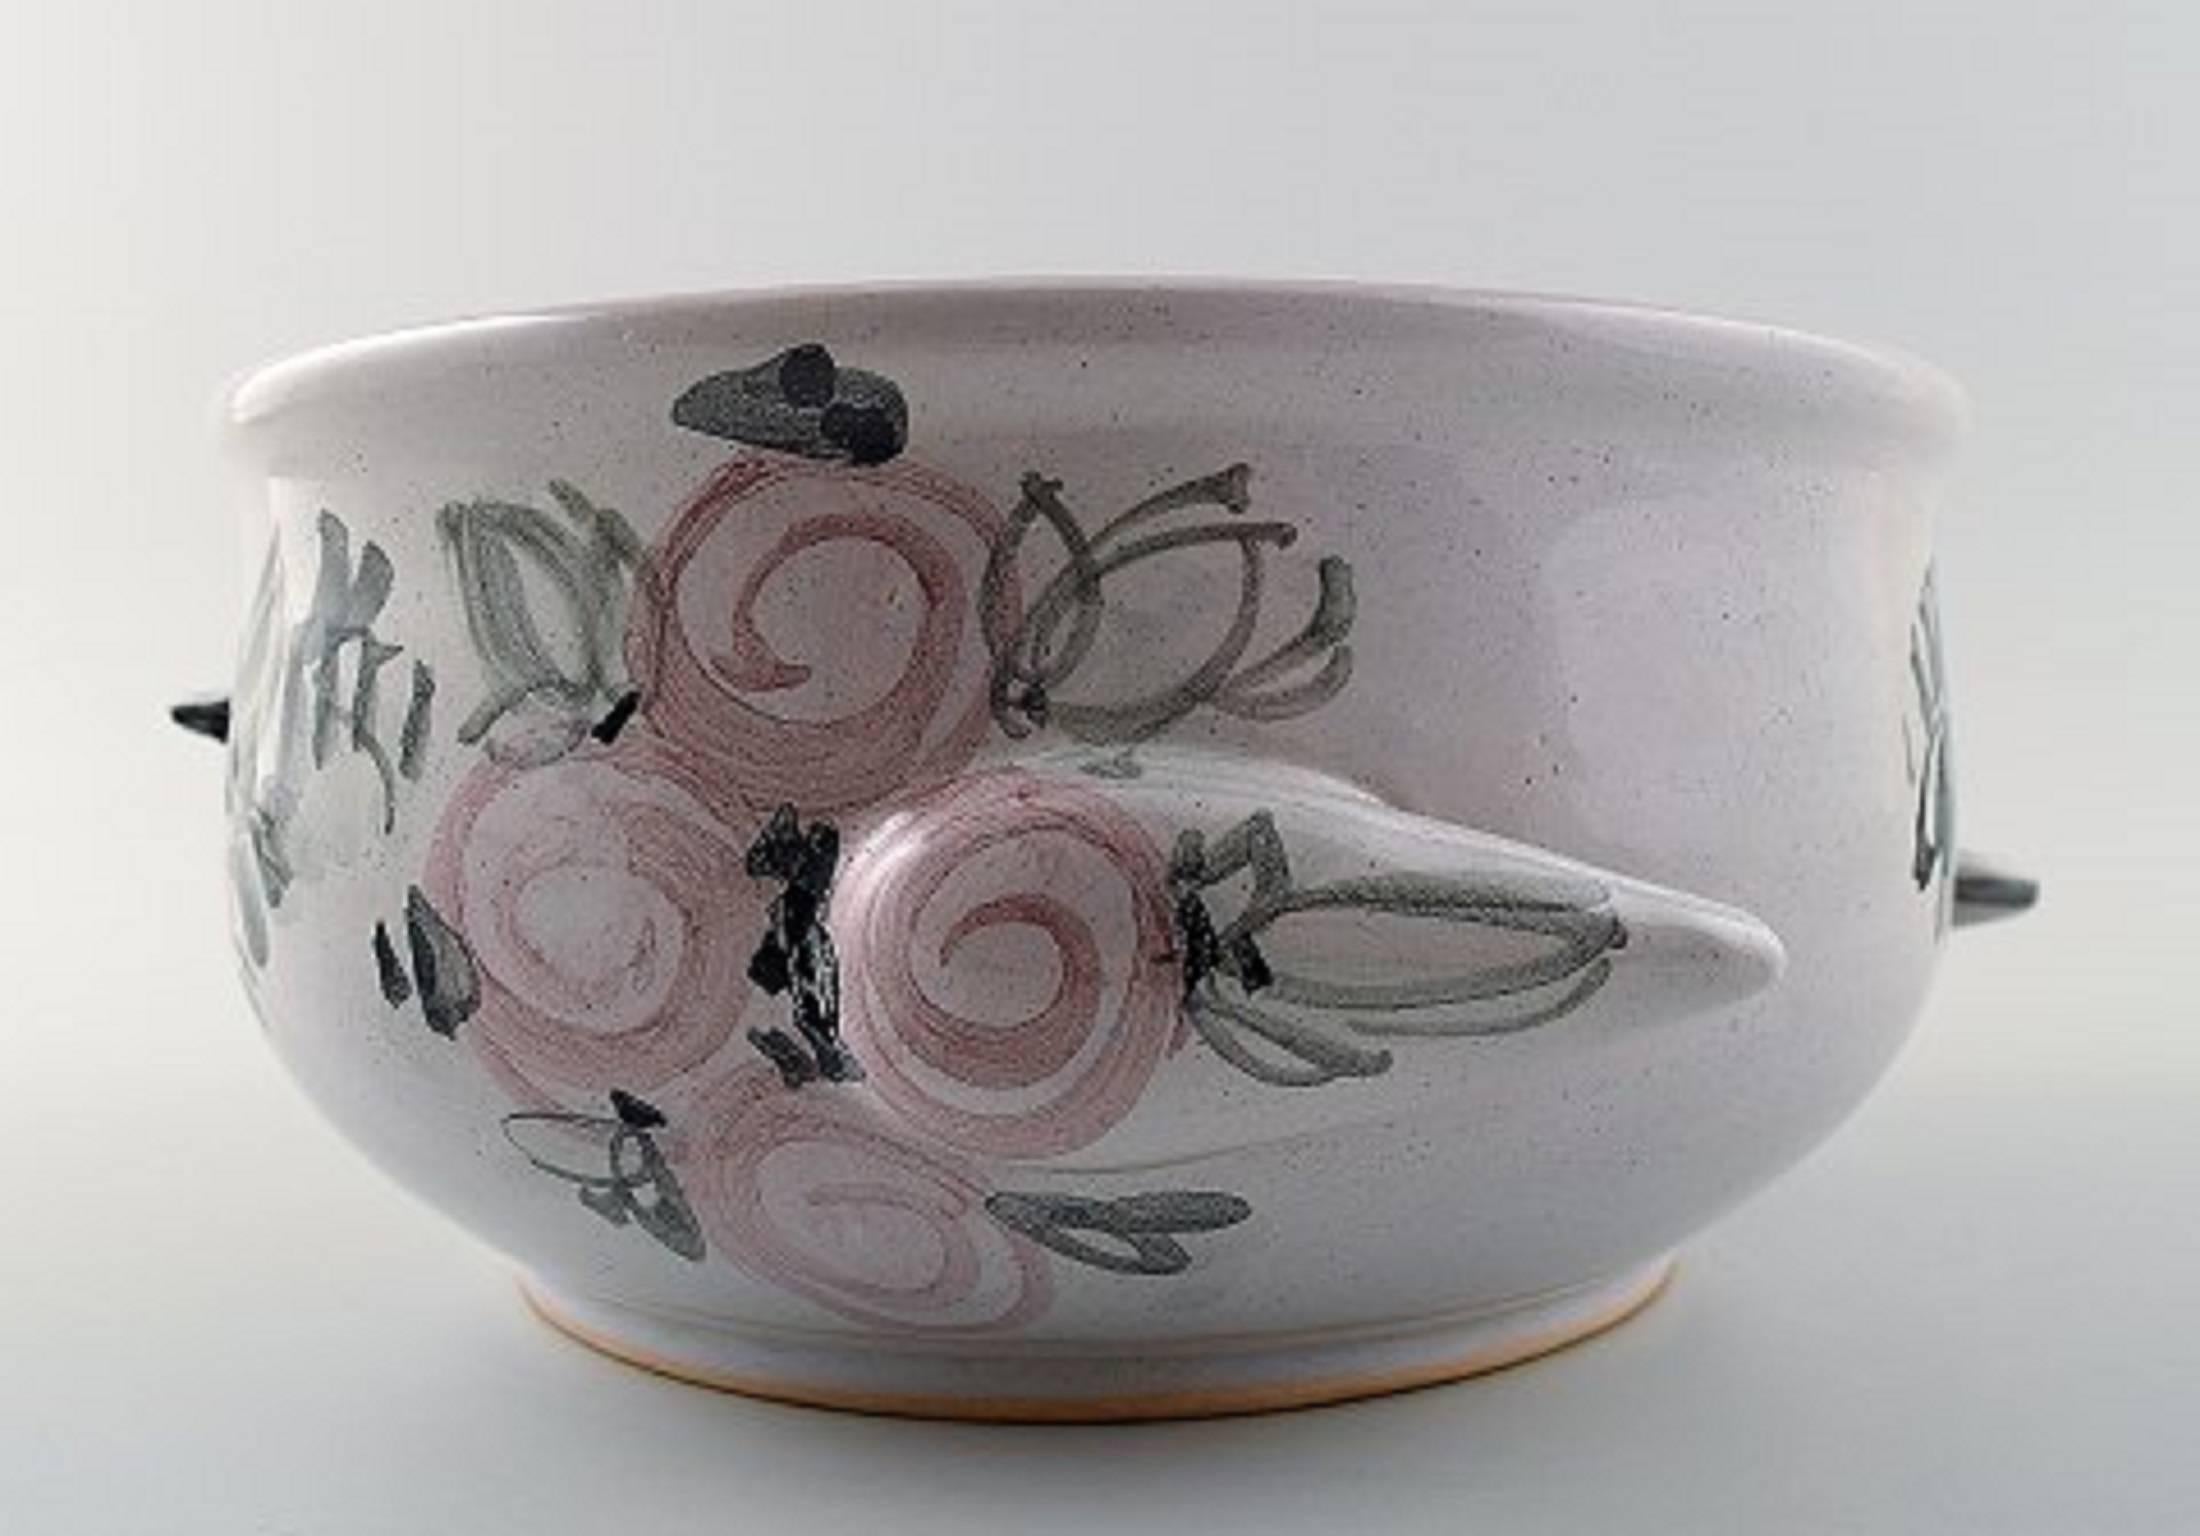 Bjorn Wiinblad unique ceramic flower pot, pink and gray glaze.
Measures: 22 cm x 9.5cm. Model Number V.68.
Dated: 1976.
In perfect condition.